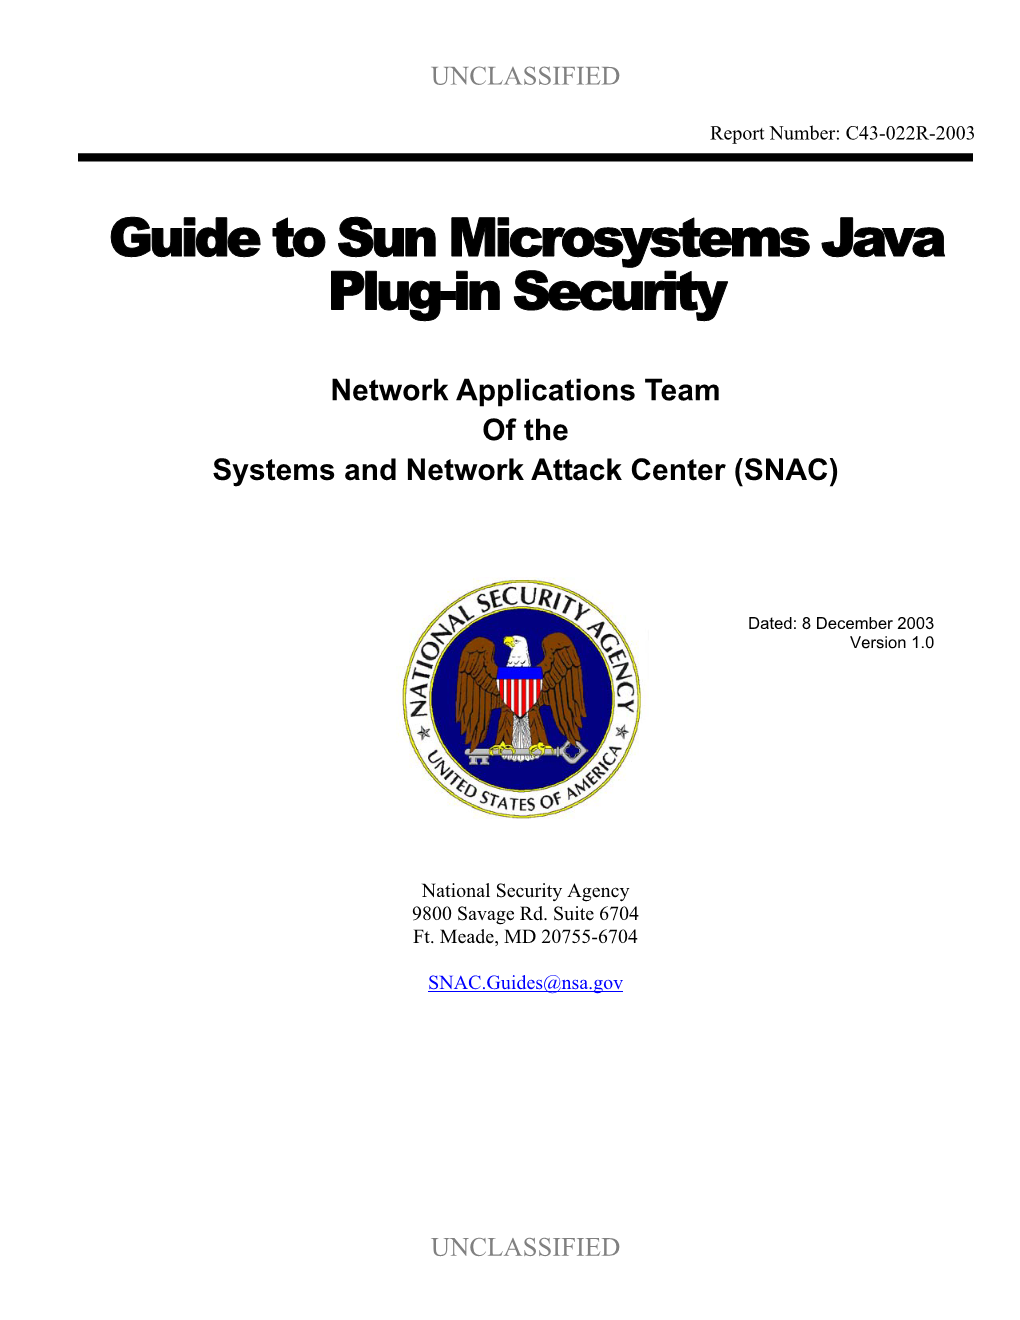 Guide to Sun Microsystems Java Plug-In Security